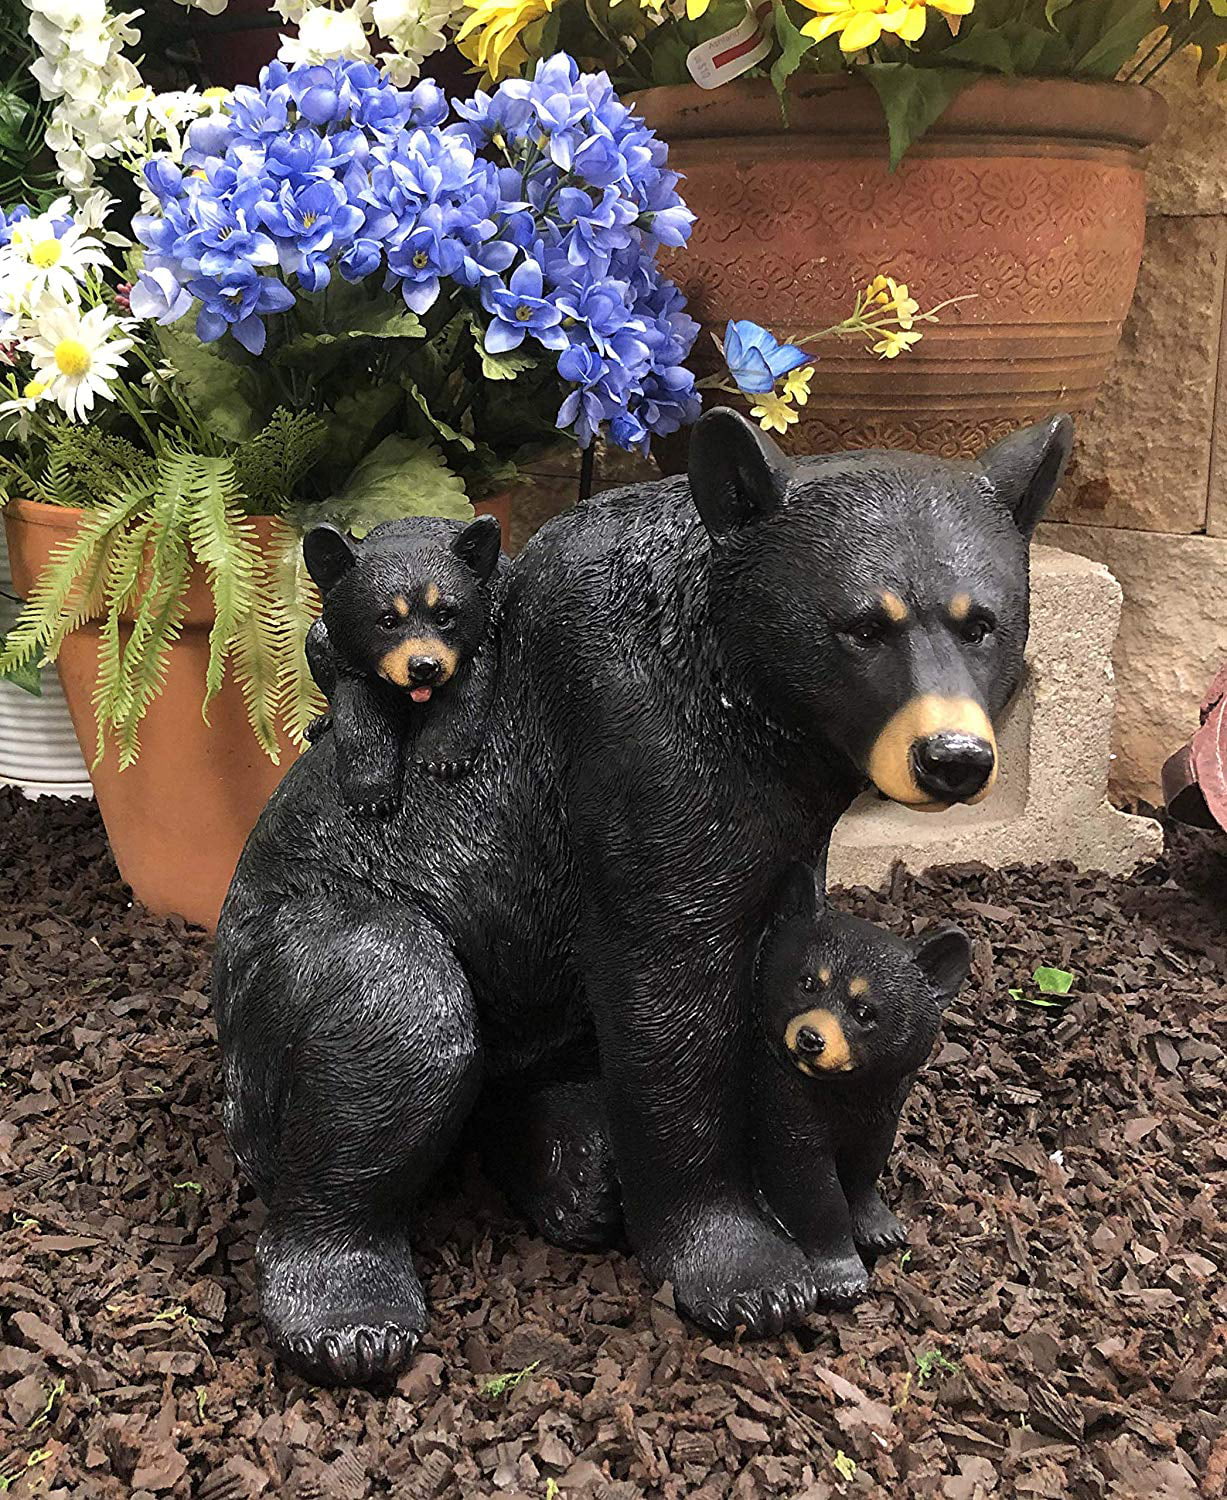 Very Rare Mother Bear With Baby Bears 3 1/4” Cute Bear Home Decor Vintage Bear With Two Cubs Figurine